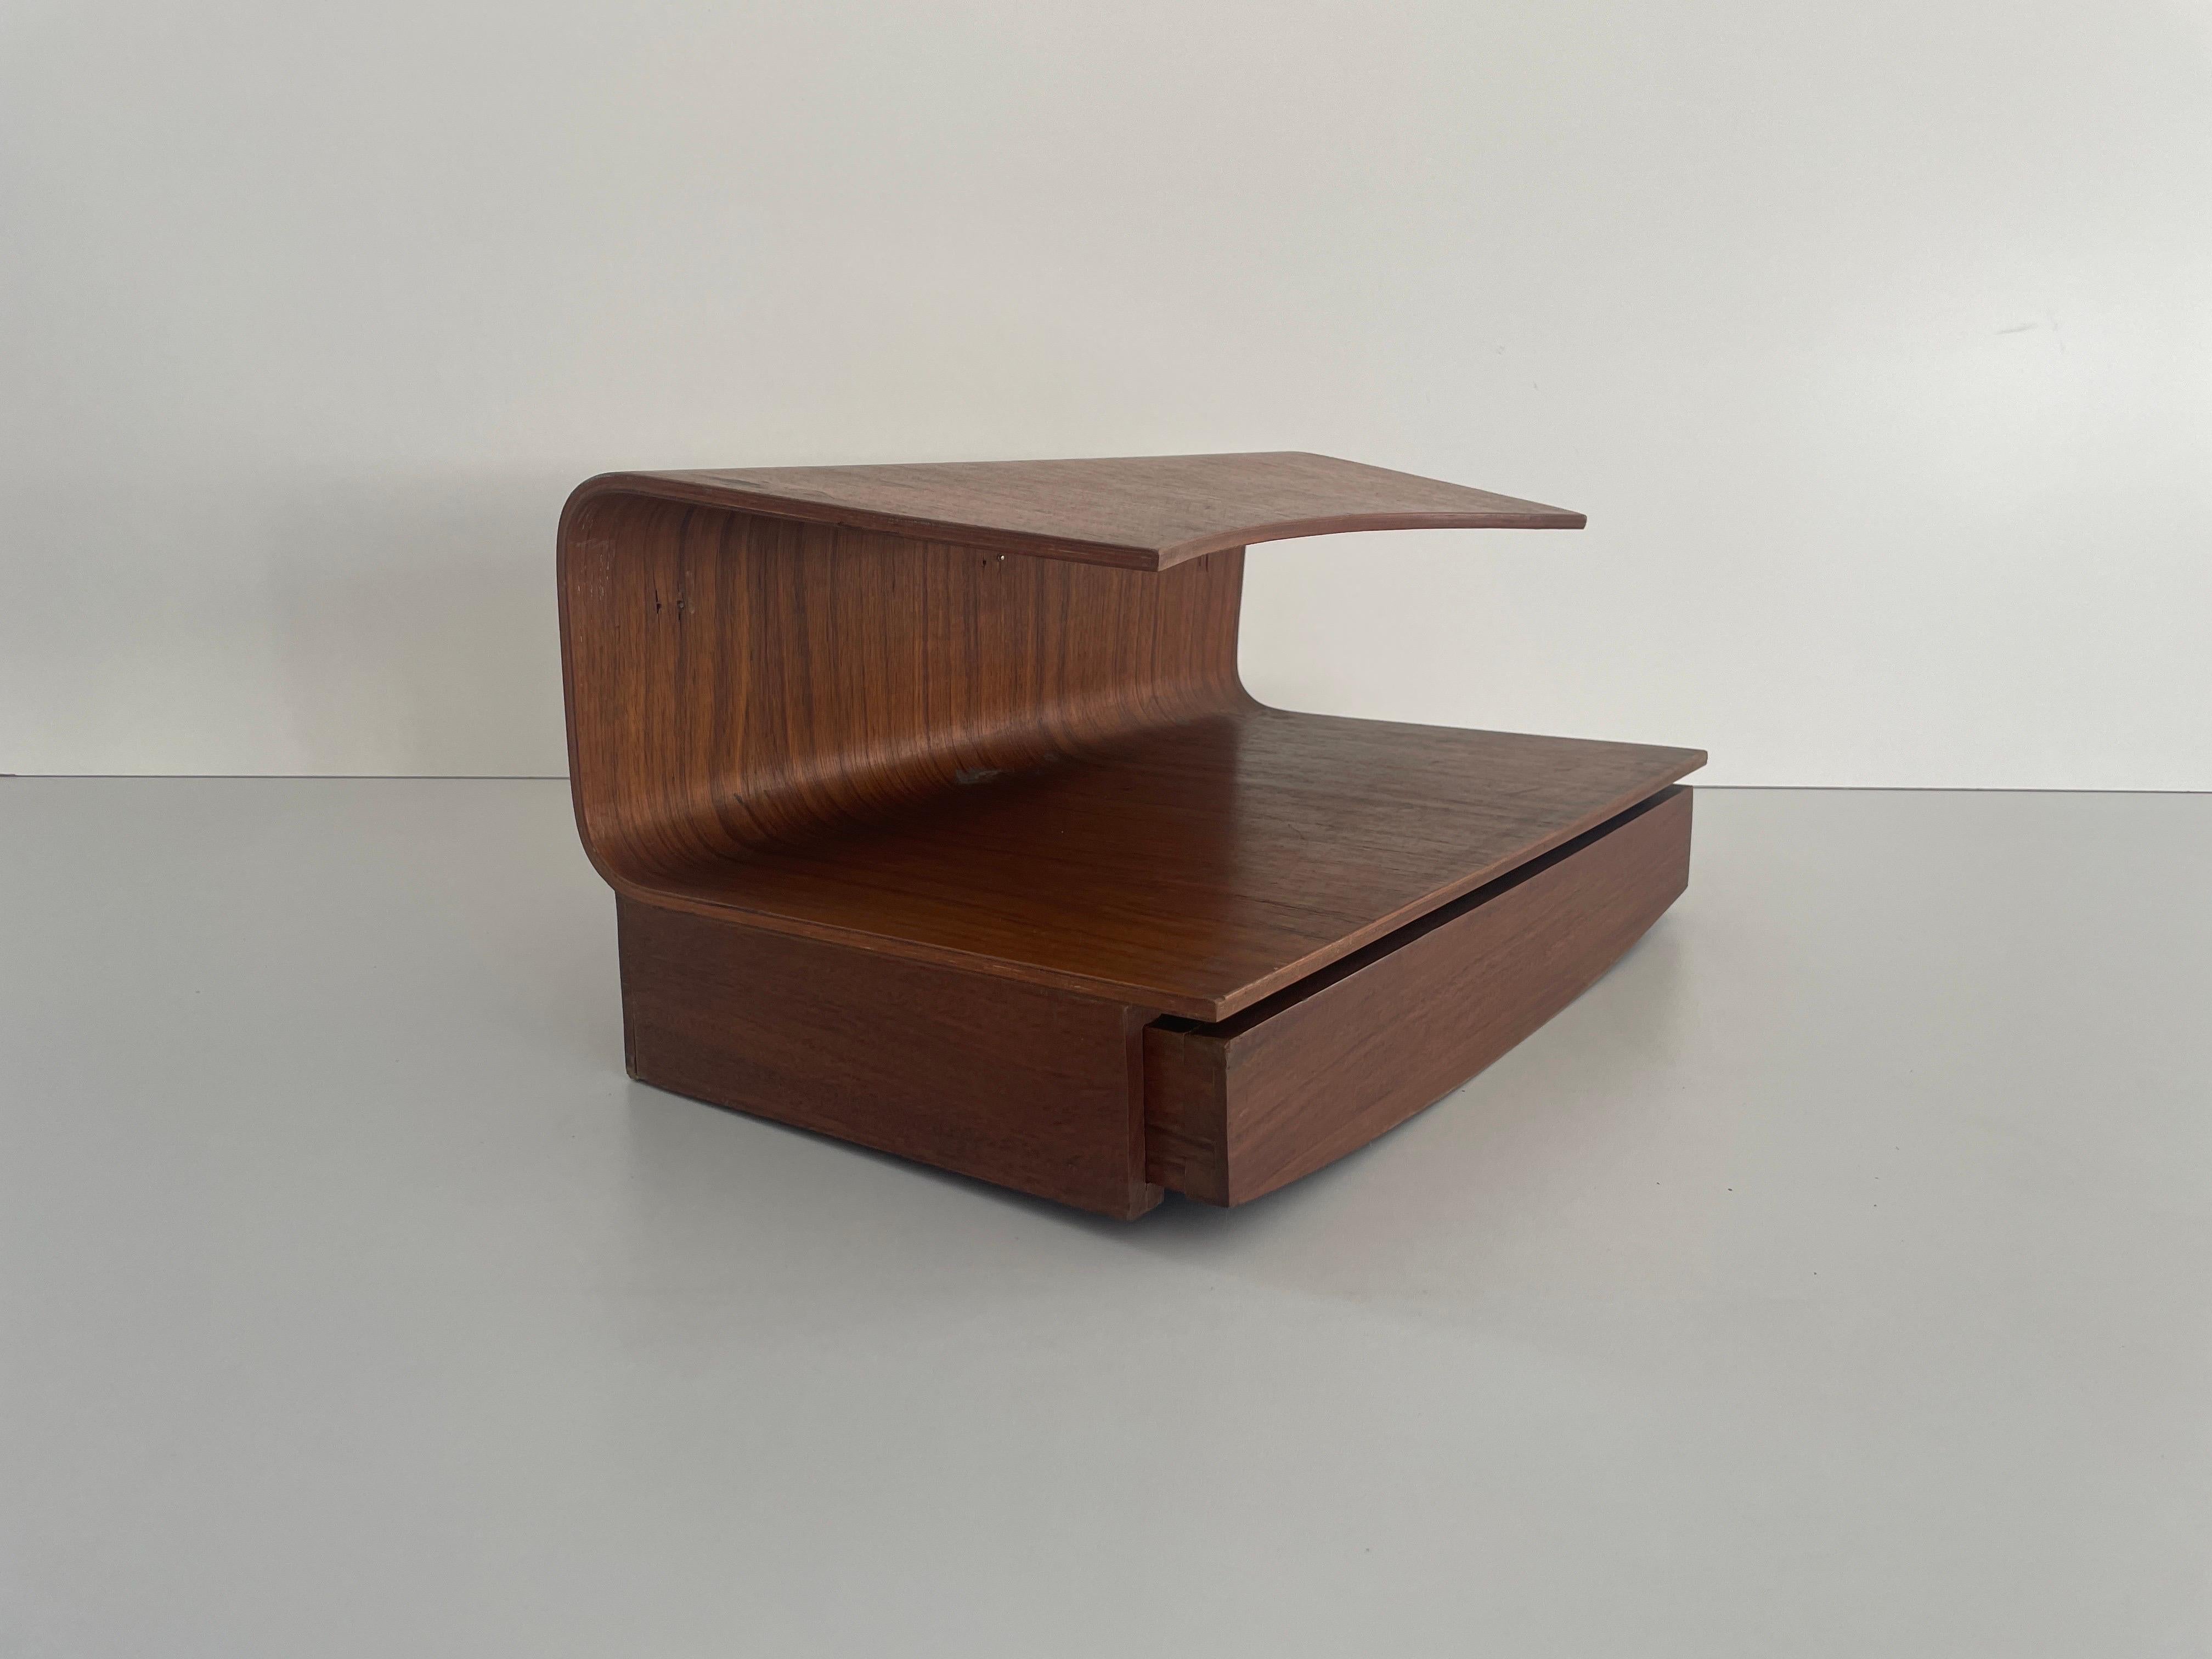 Italian Wood Floating Shelf with Drawer, 1960s, Italy For Sale 7